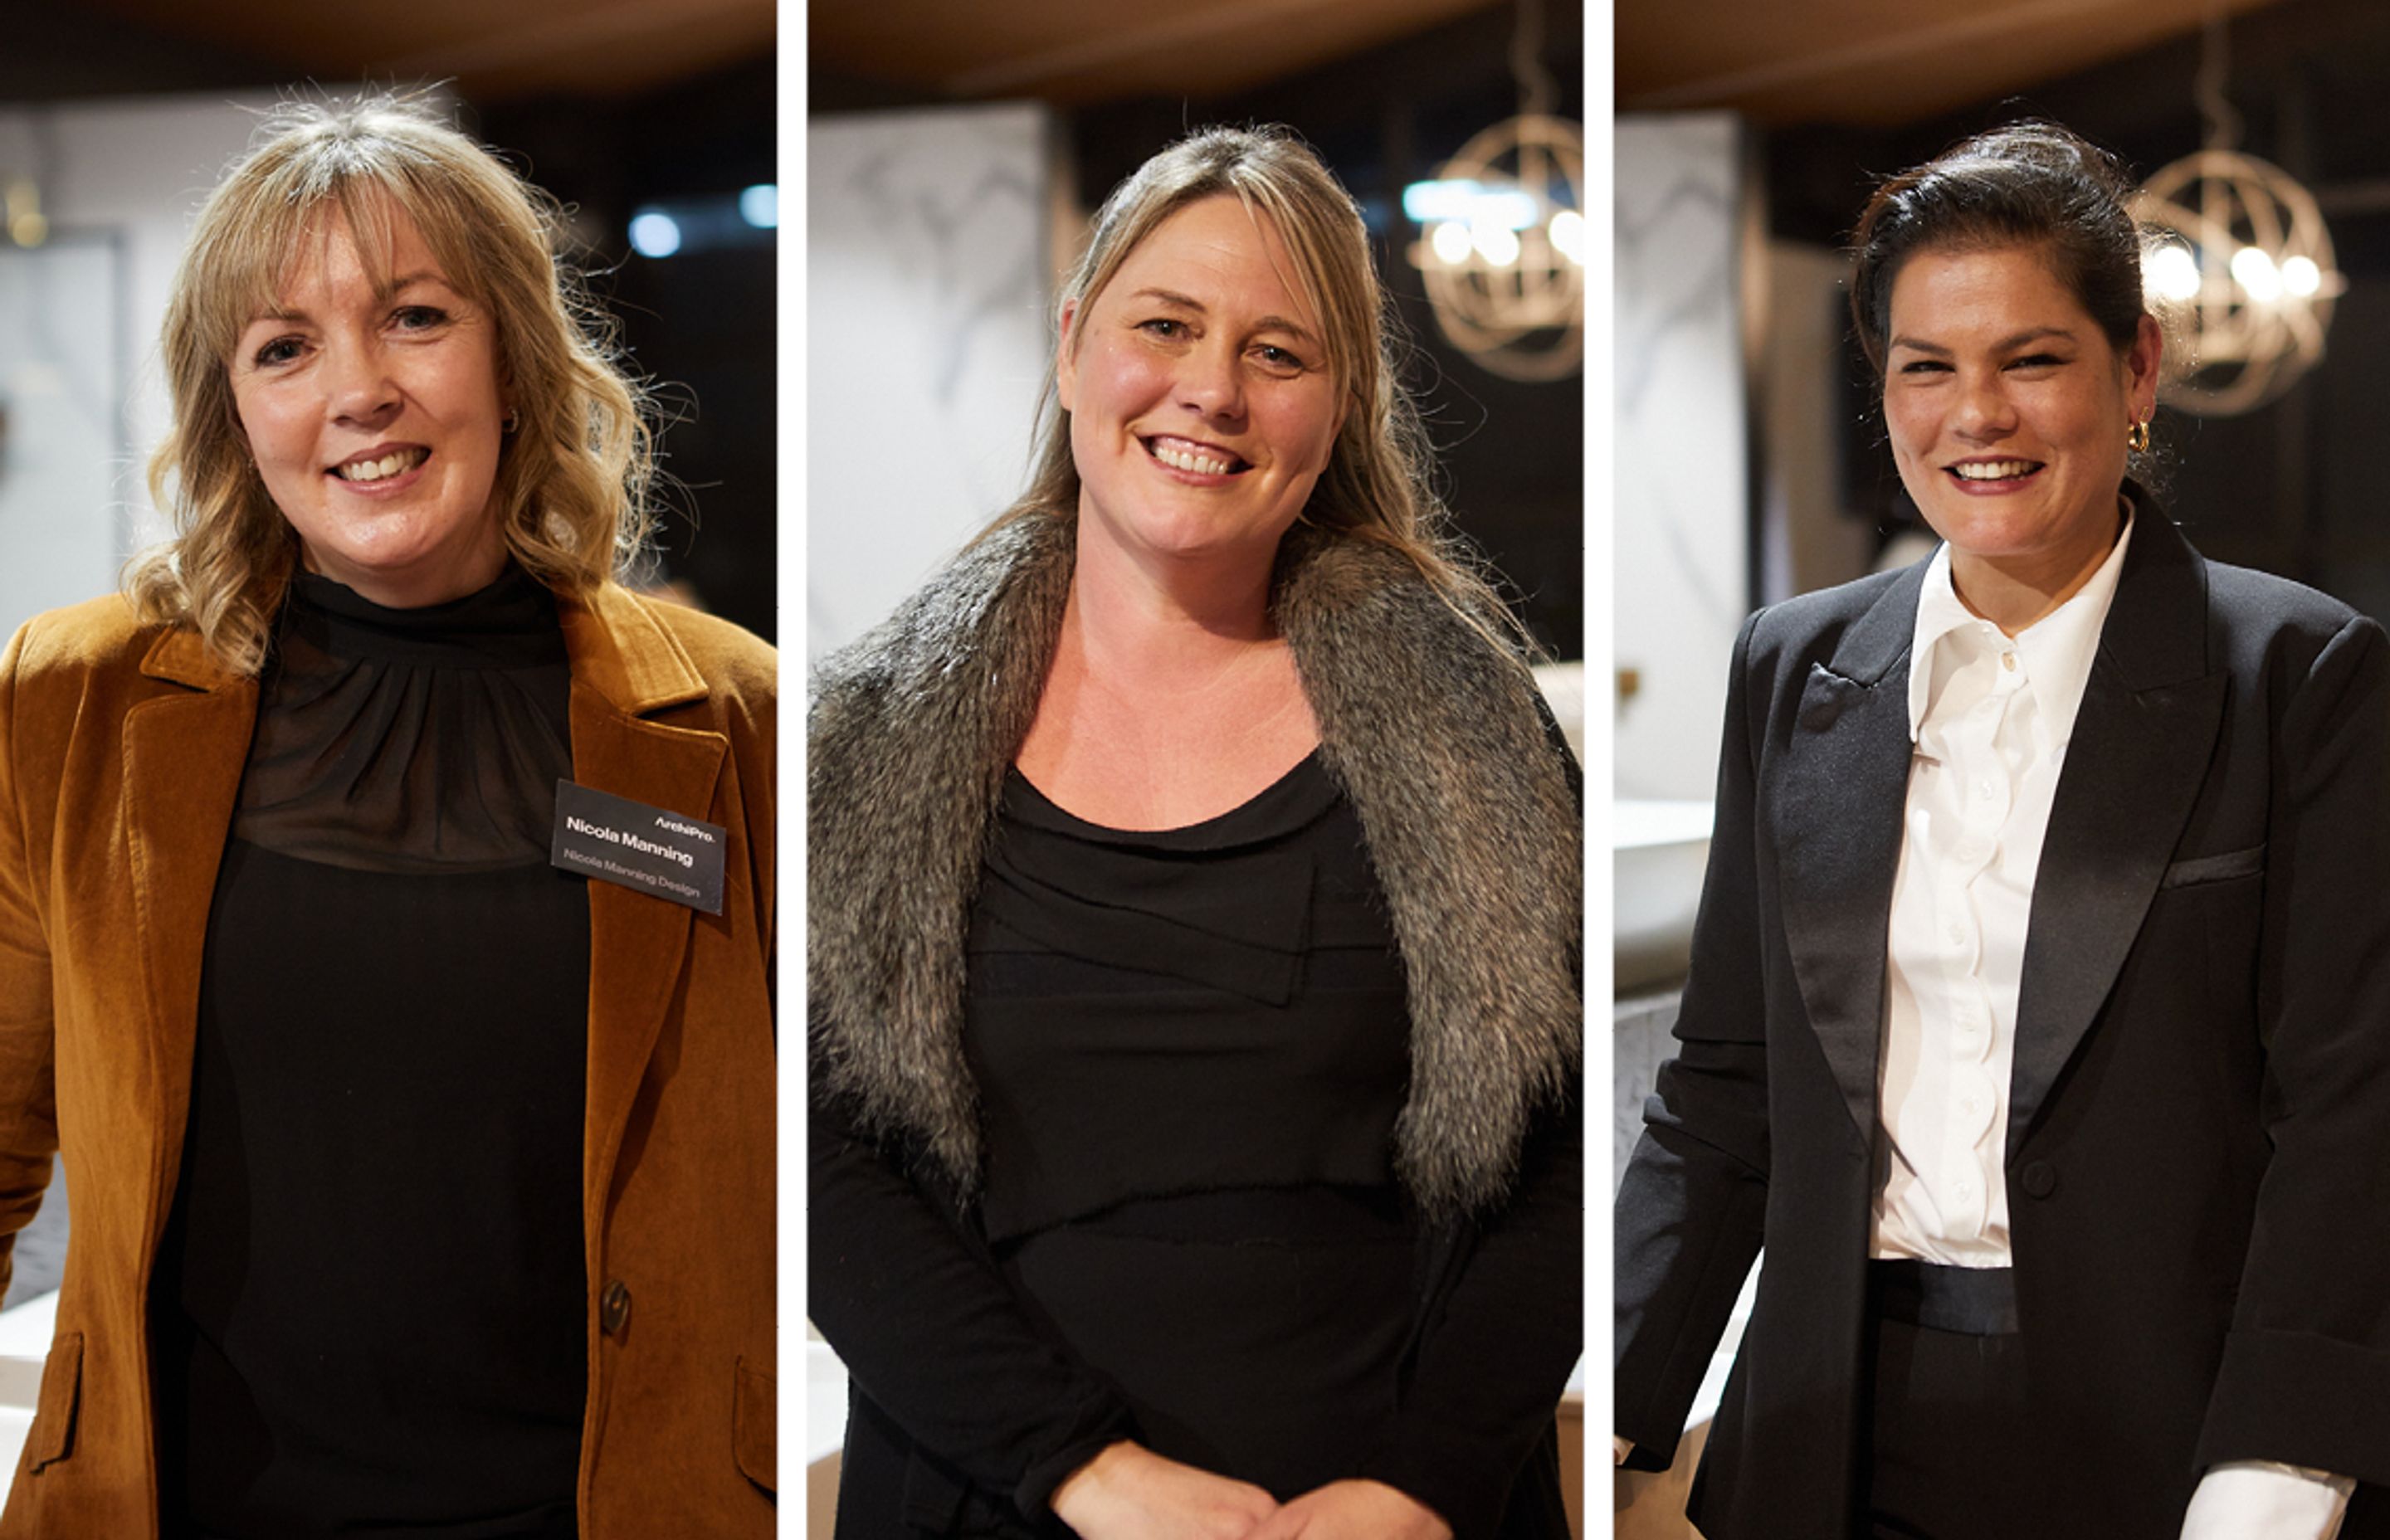 From left: Designers Nicola Manning, Natalie Du Bois and Janice Kumar-Ward shared their insights into the latest trends in bathrooms and bathroom design.